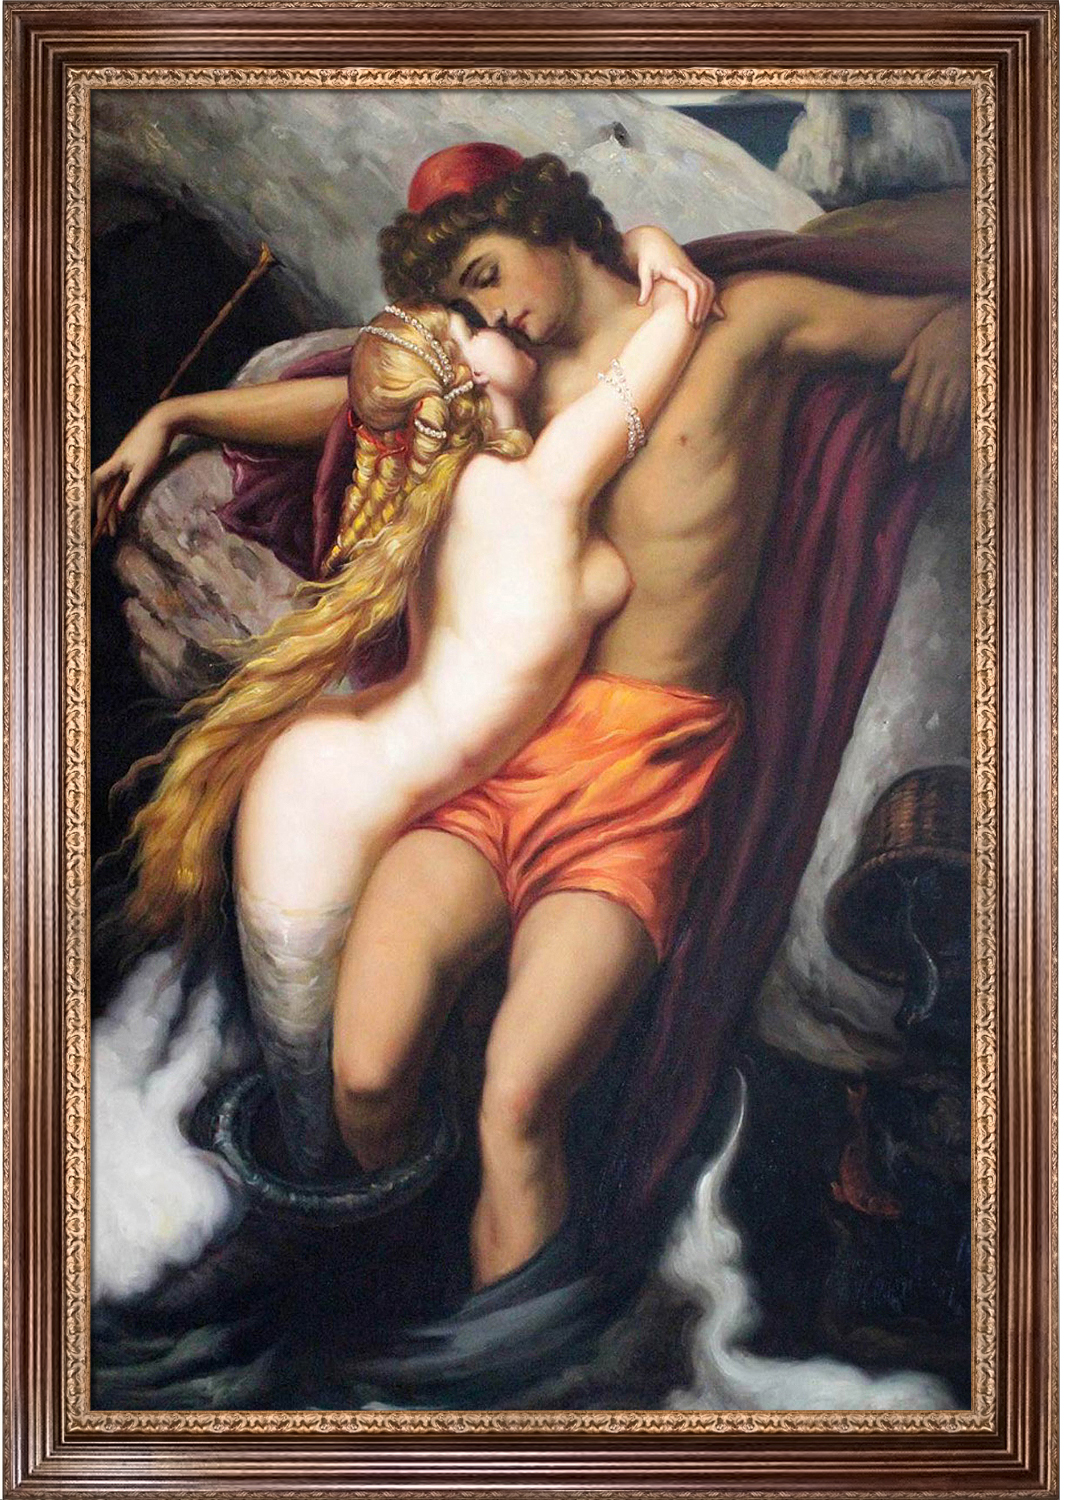 “The Fisherman and the Syren” by Frederic Leighton portraying a fatal moment of passion garnered the highest traffic in overstockArt.com’s Romantic Gallery.